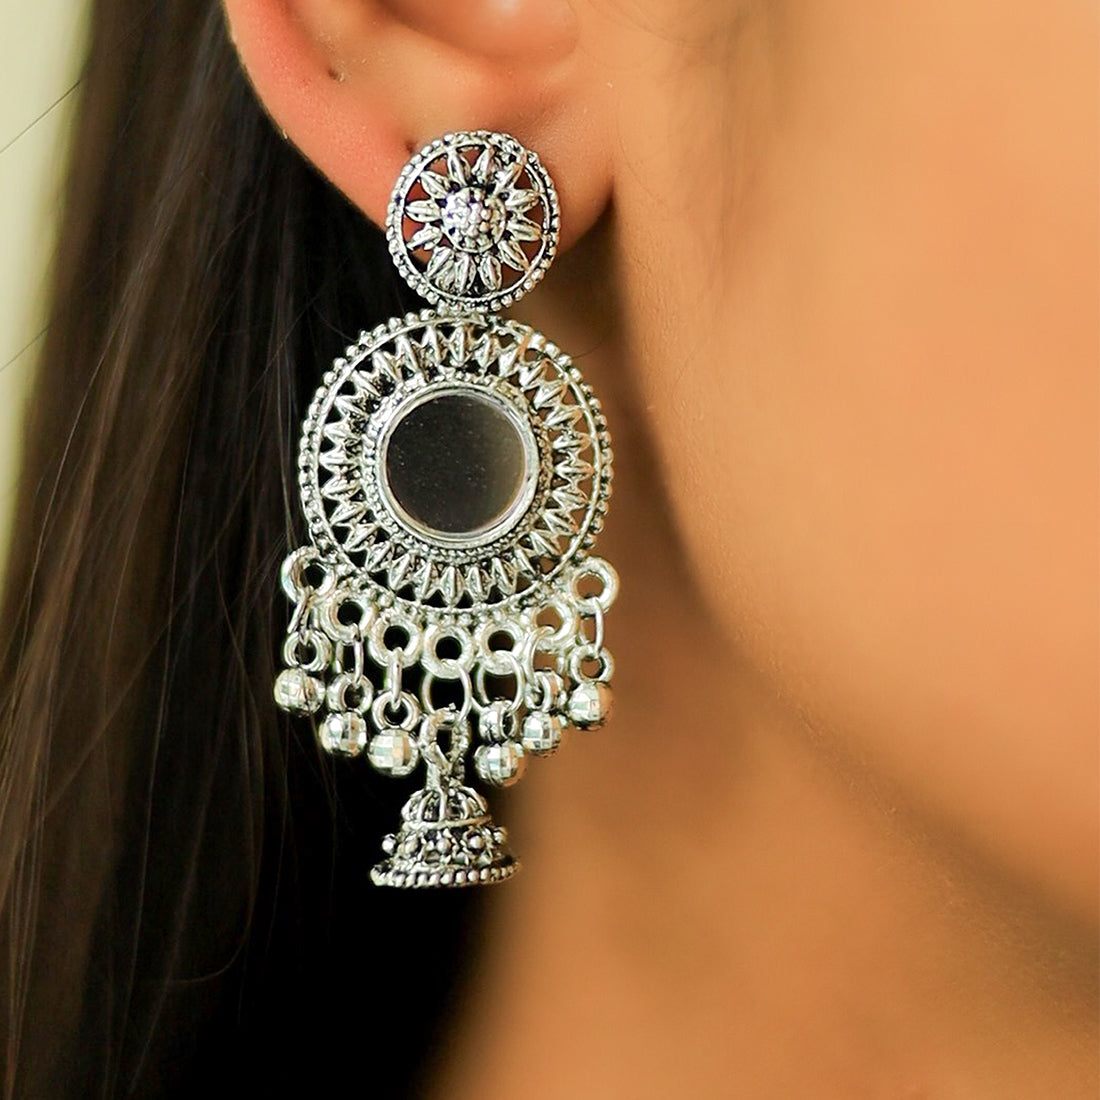 Set Of 2 Ethnic Silver Small Jhumki Danglers With Mirror Work Accent